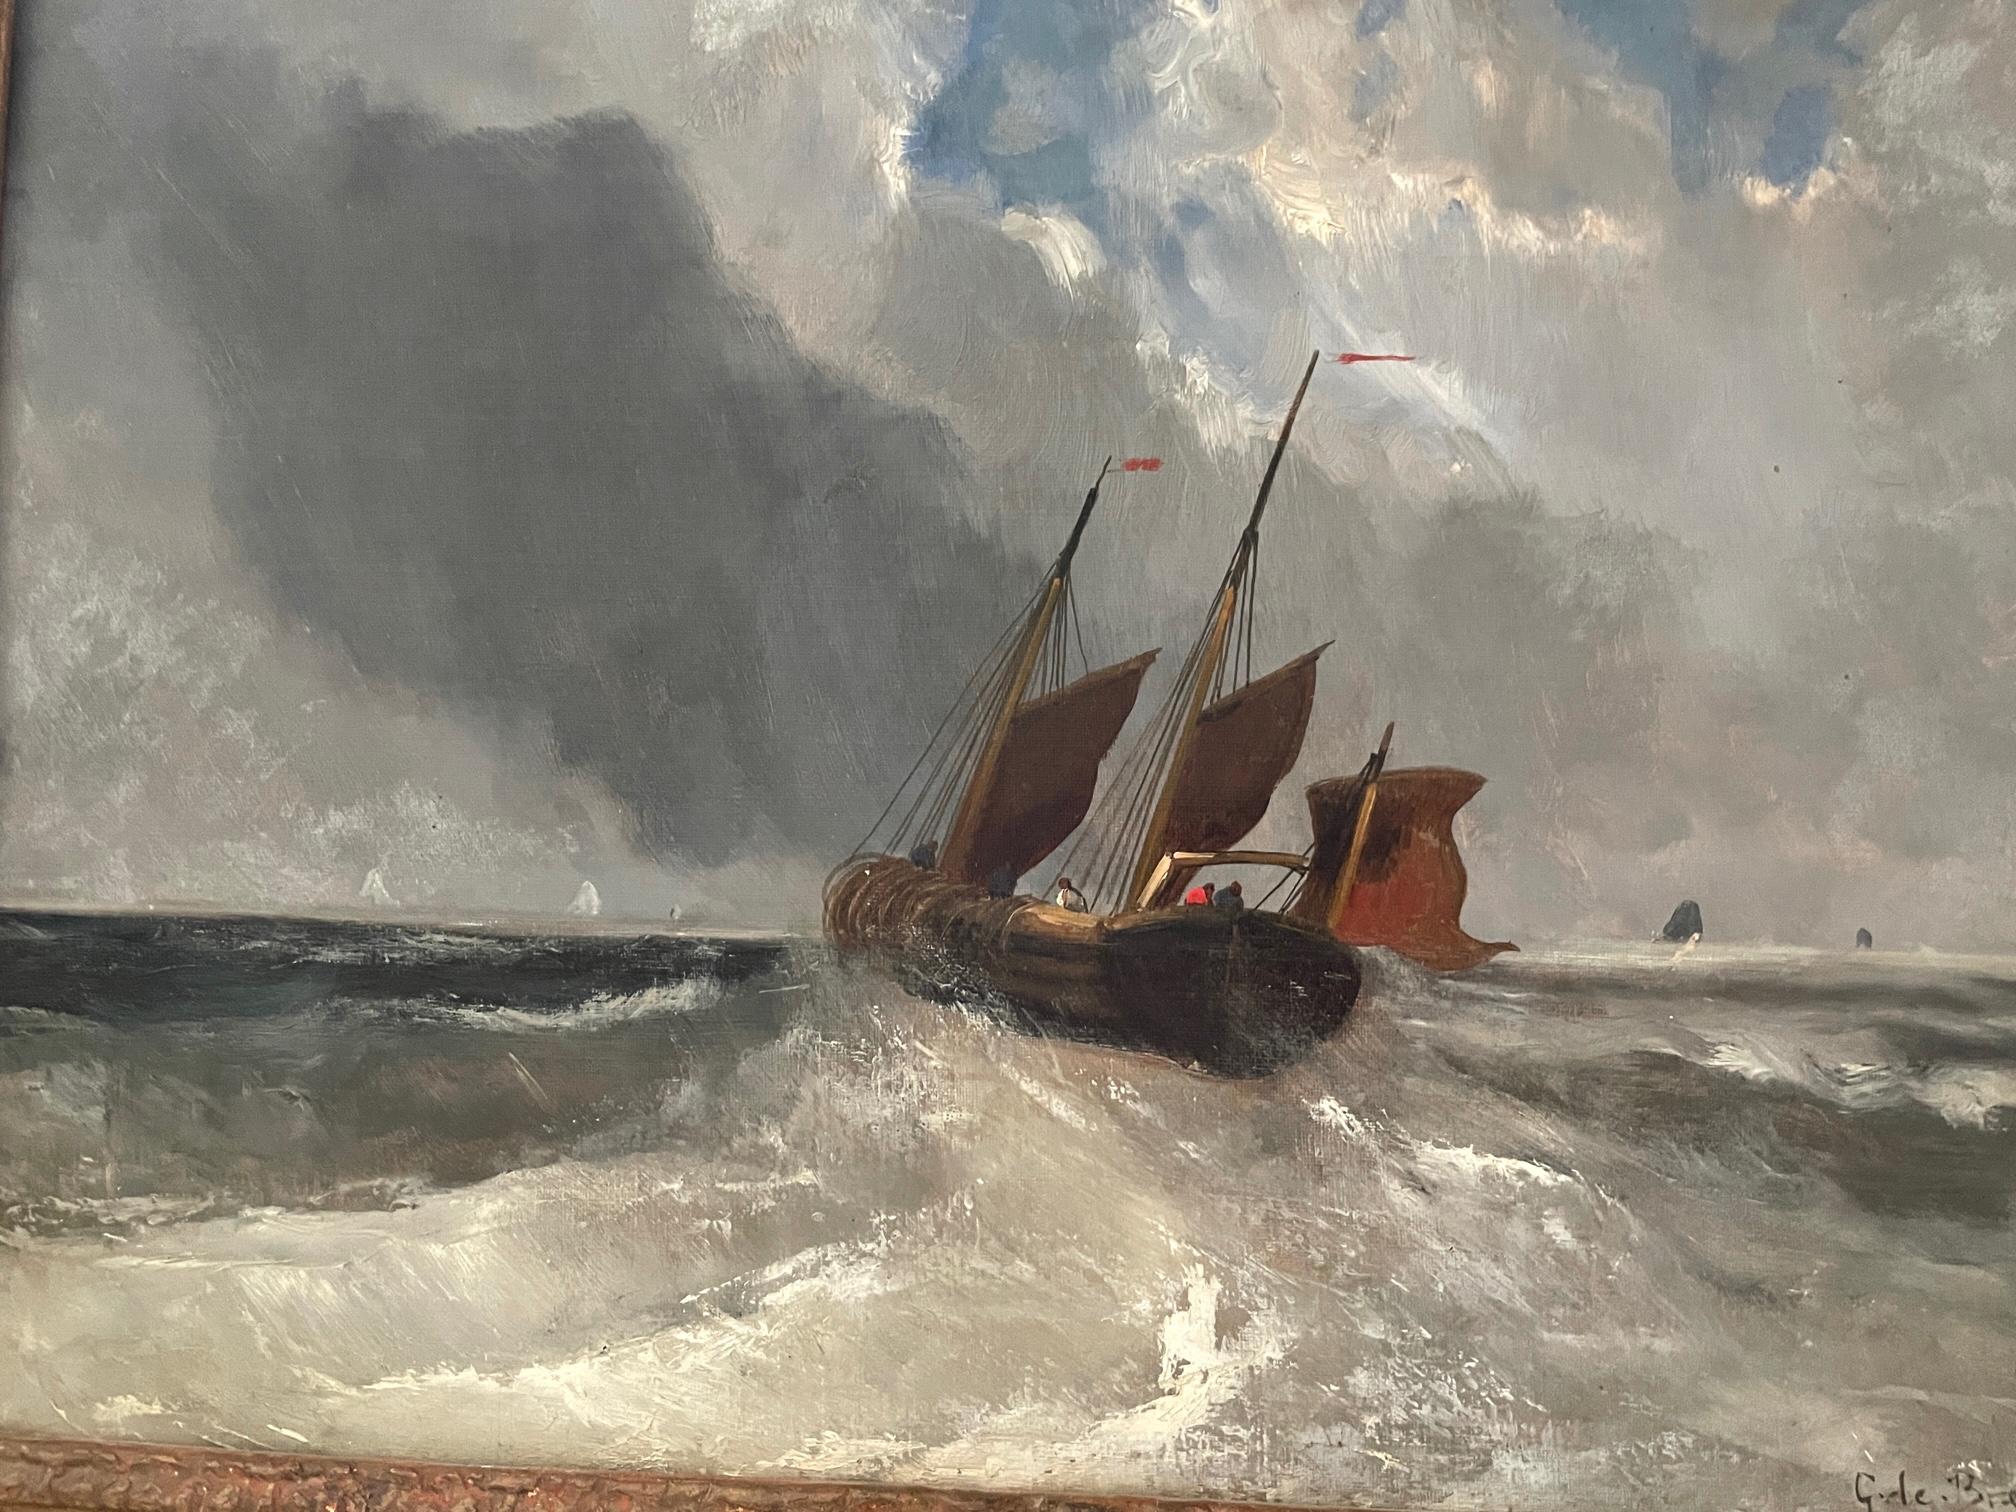 Off to Sea! - Painting by Gustave de Breanski